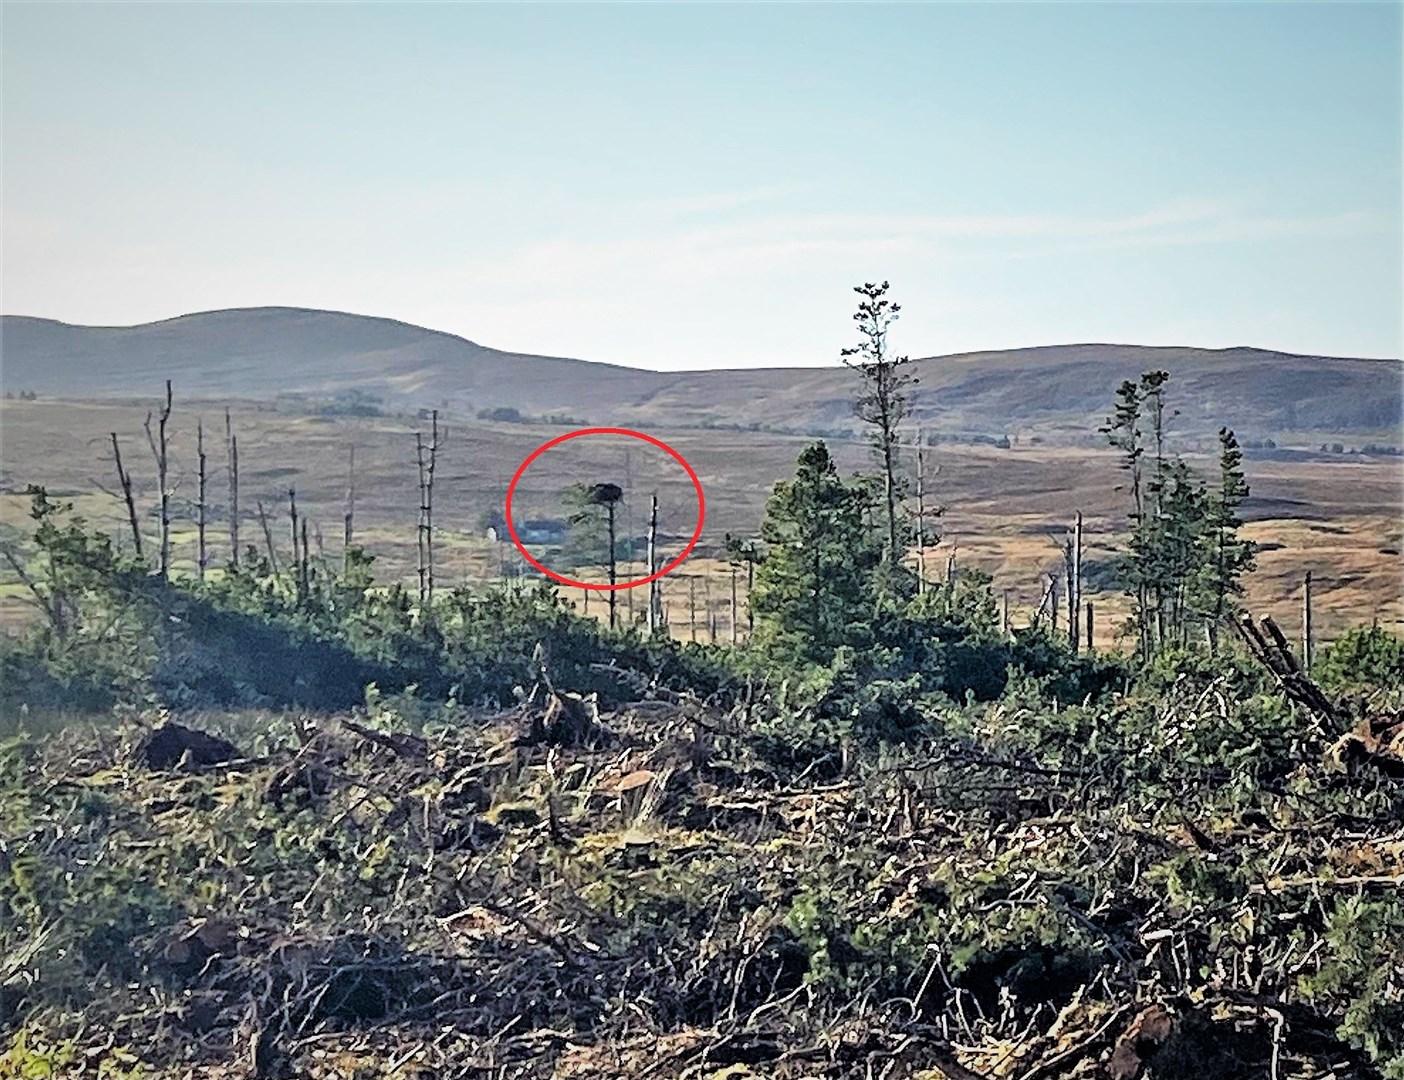 A red circle shows the nest is still intact after initial fears it had been lost.